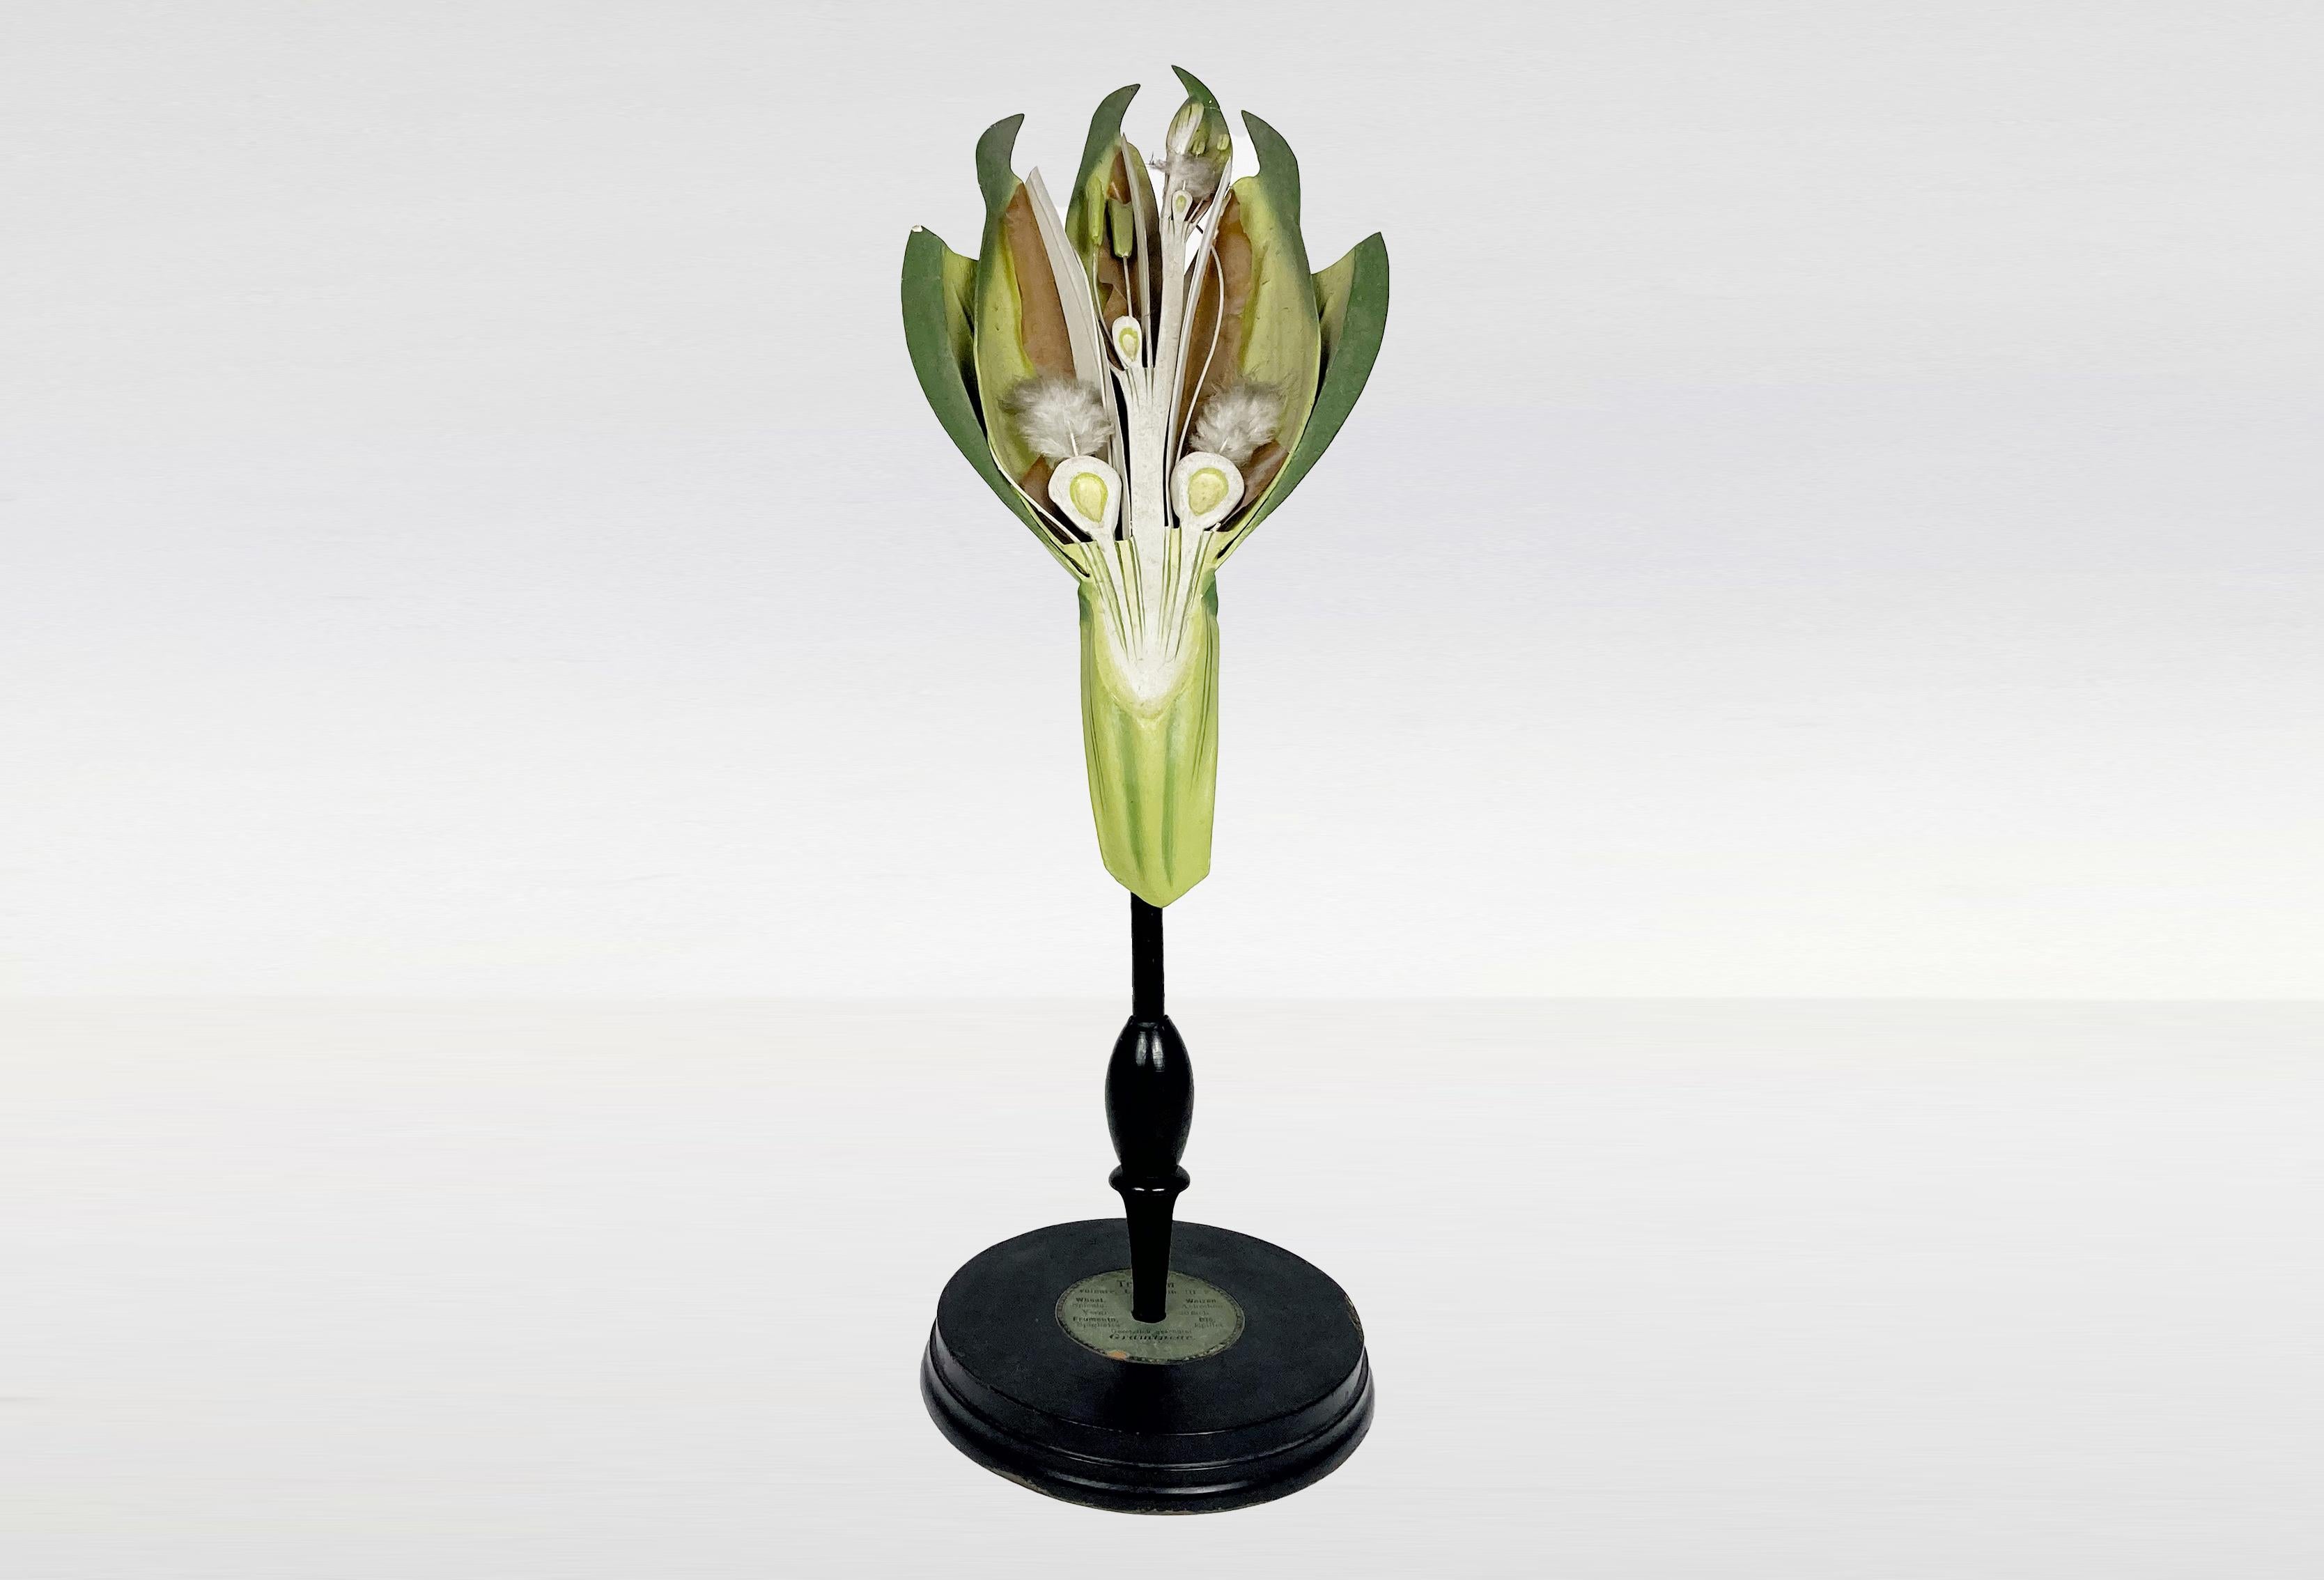 Enlarged model of a wheat flower (Triticum vulgar) uses for teaching at the end of XIXe century, beginning of XXe. Made of papier mâche, wood, celluloid. Hanpainted. 
Référence: Published in the 1914 Brendel catalog on page 25 under the #11

ROBERT